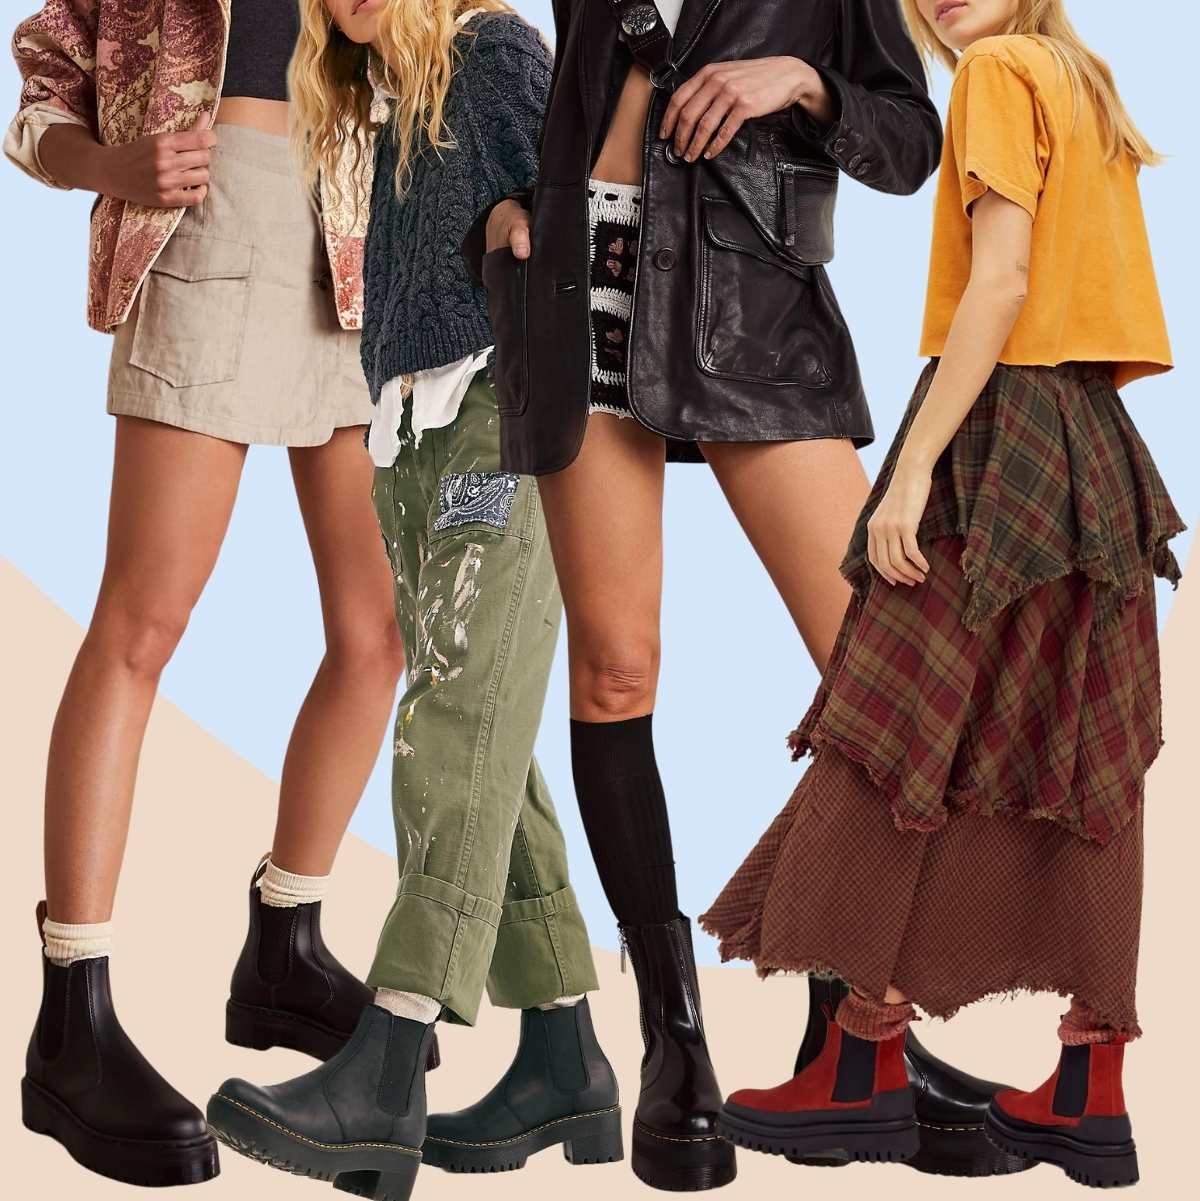 Collage of 4 women wearing different chelsea boots outfits with socks.